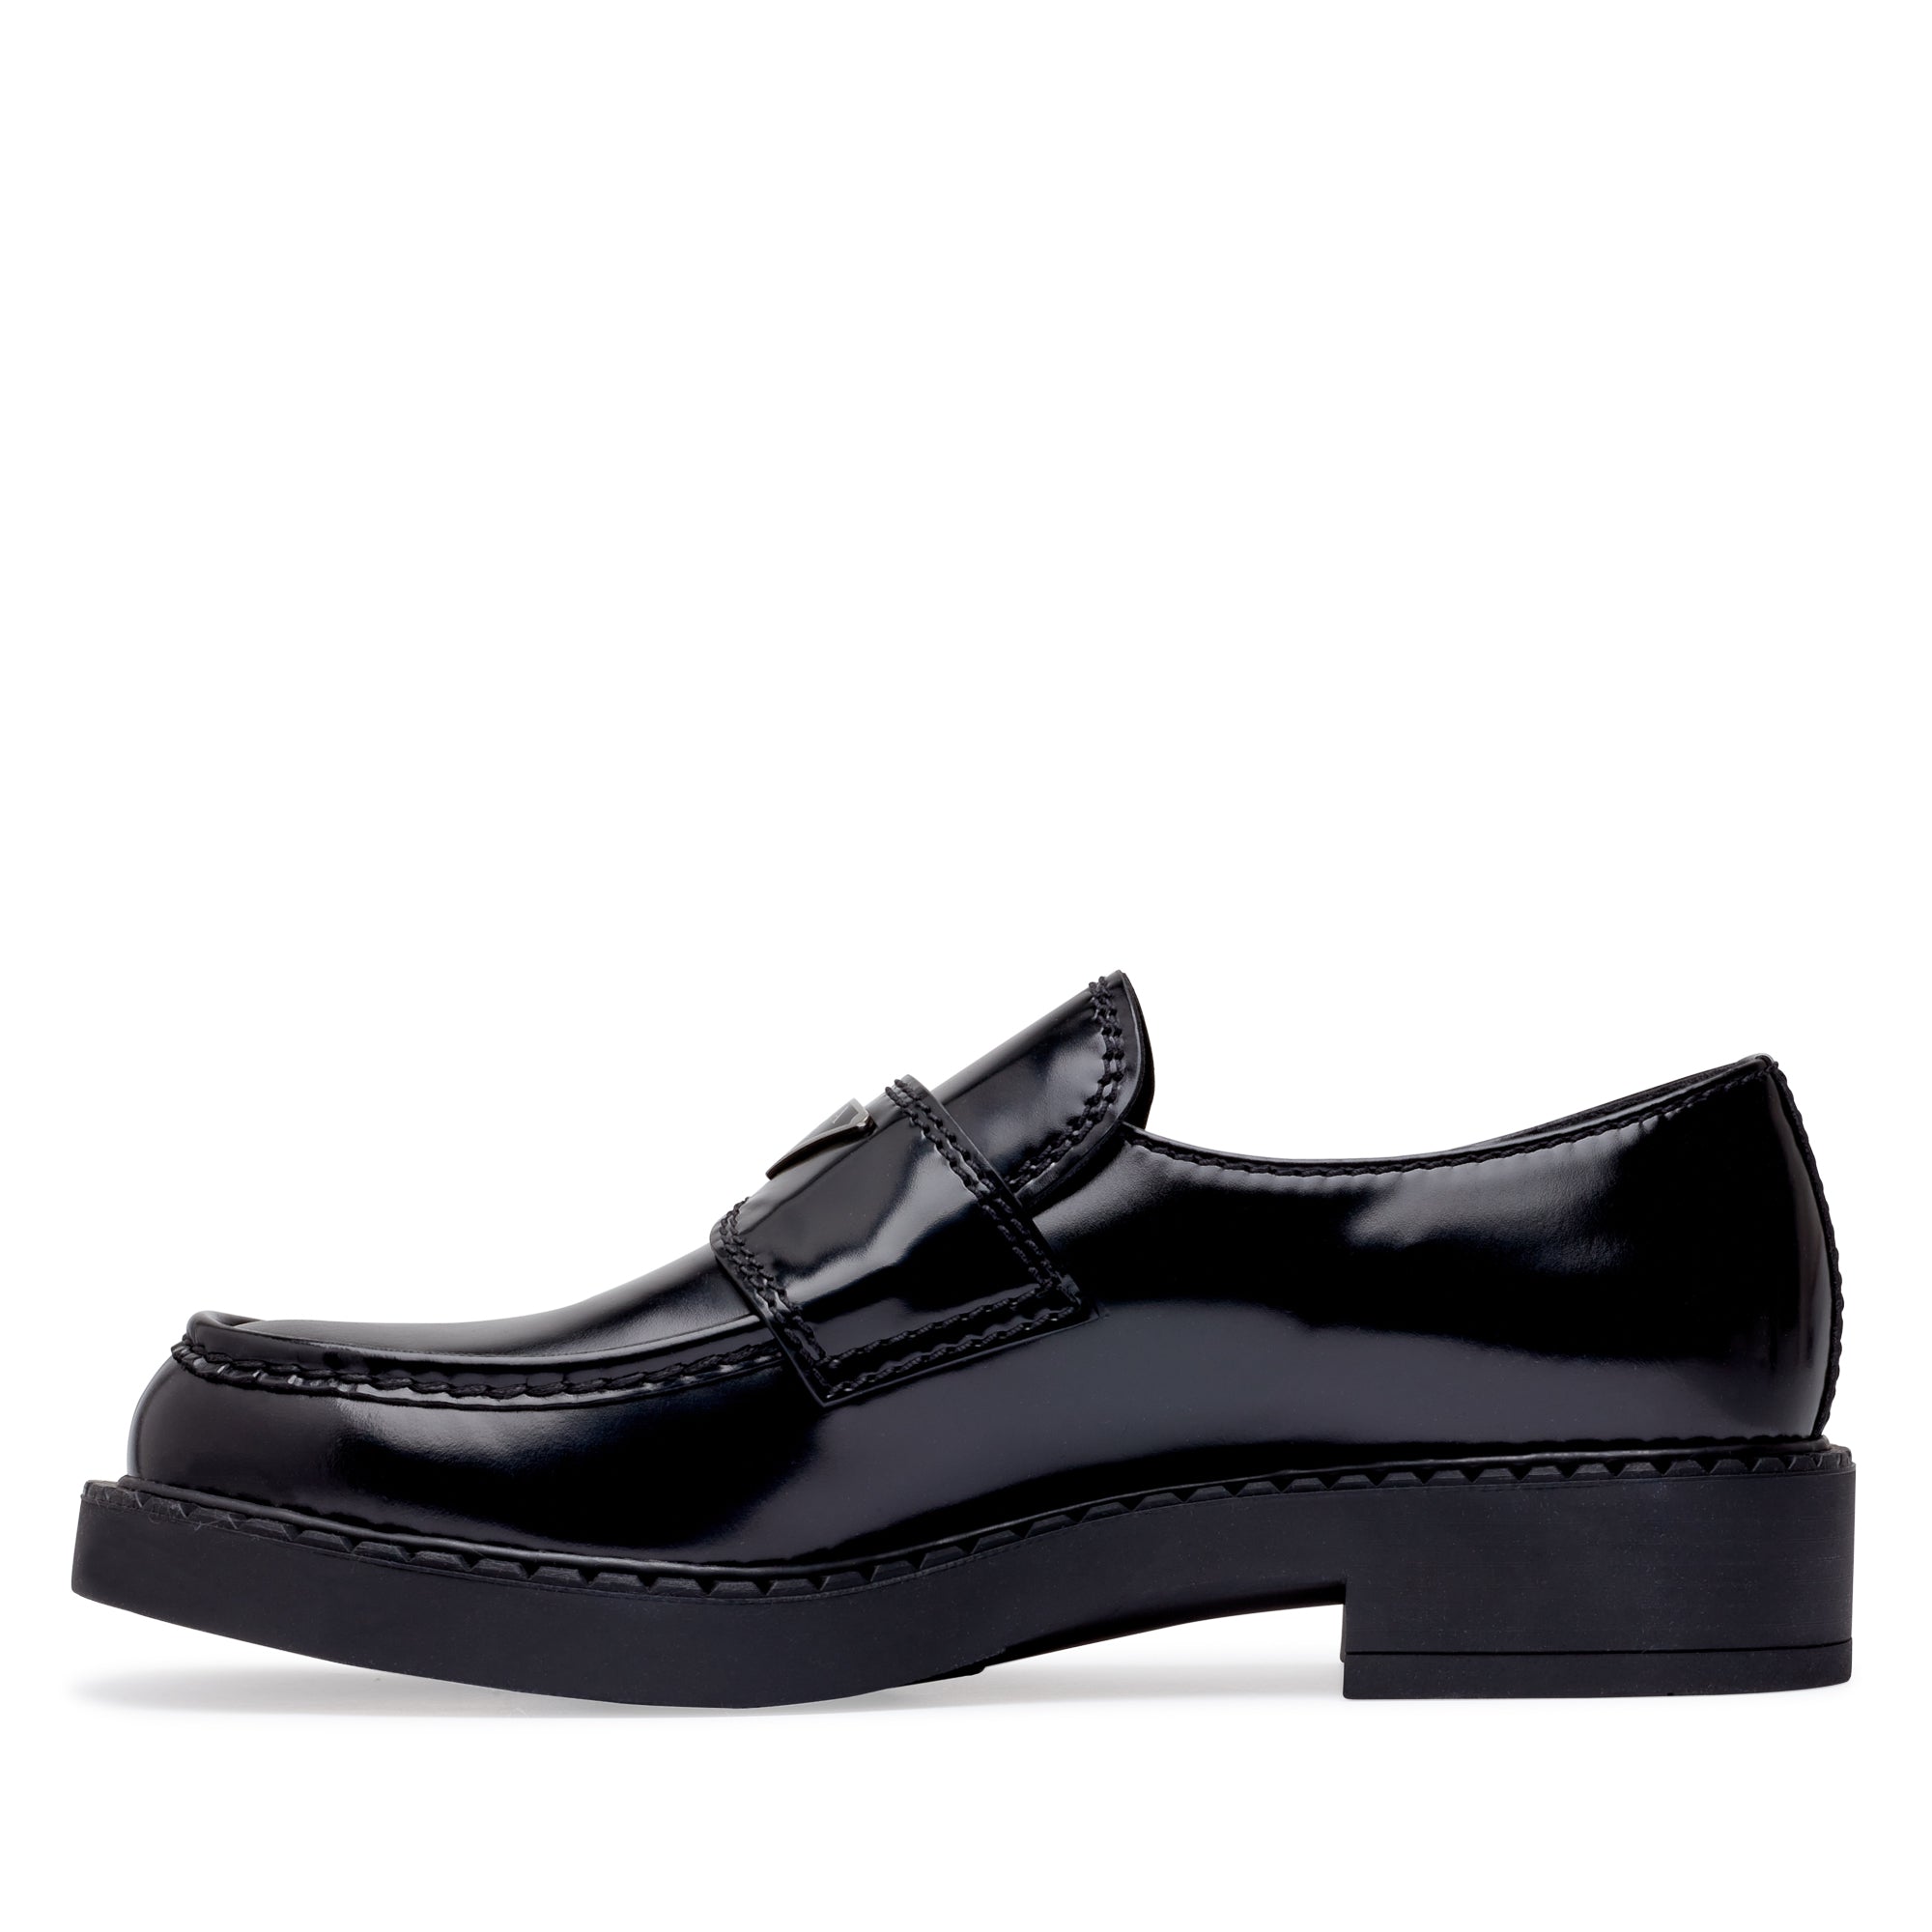 Prada - Men's Brushed Leather Loafers - (Black) view 2